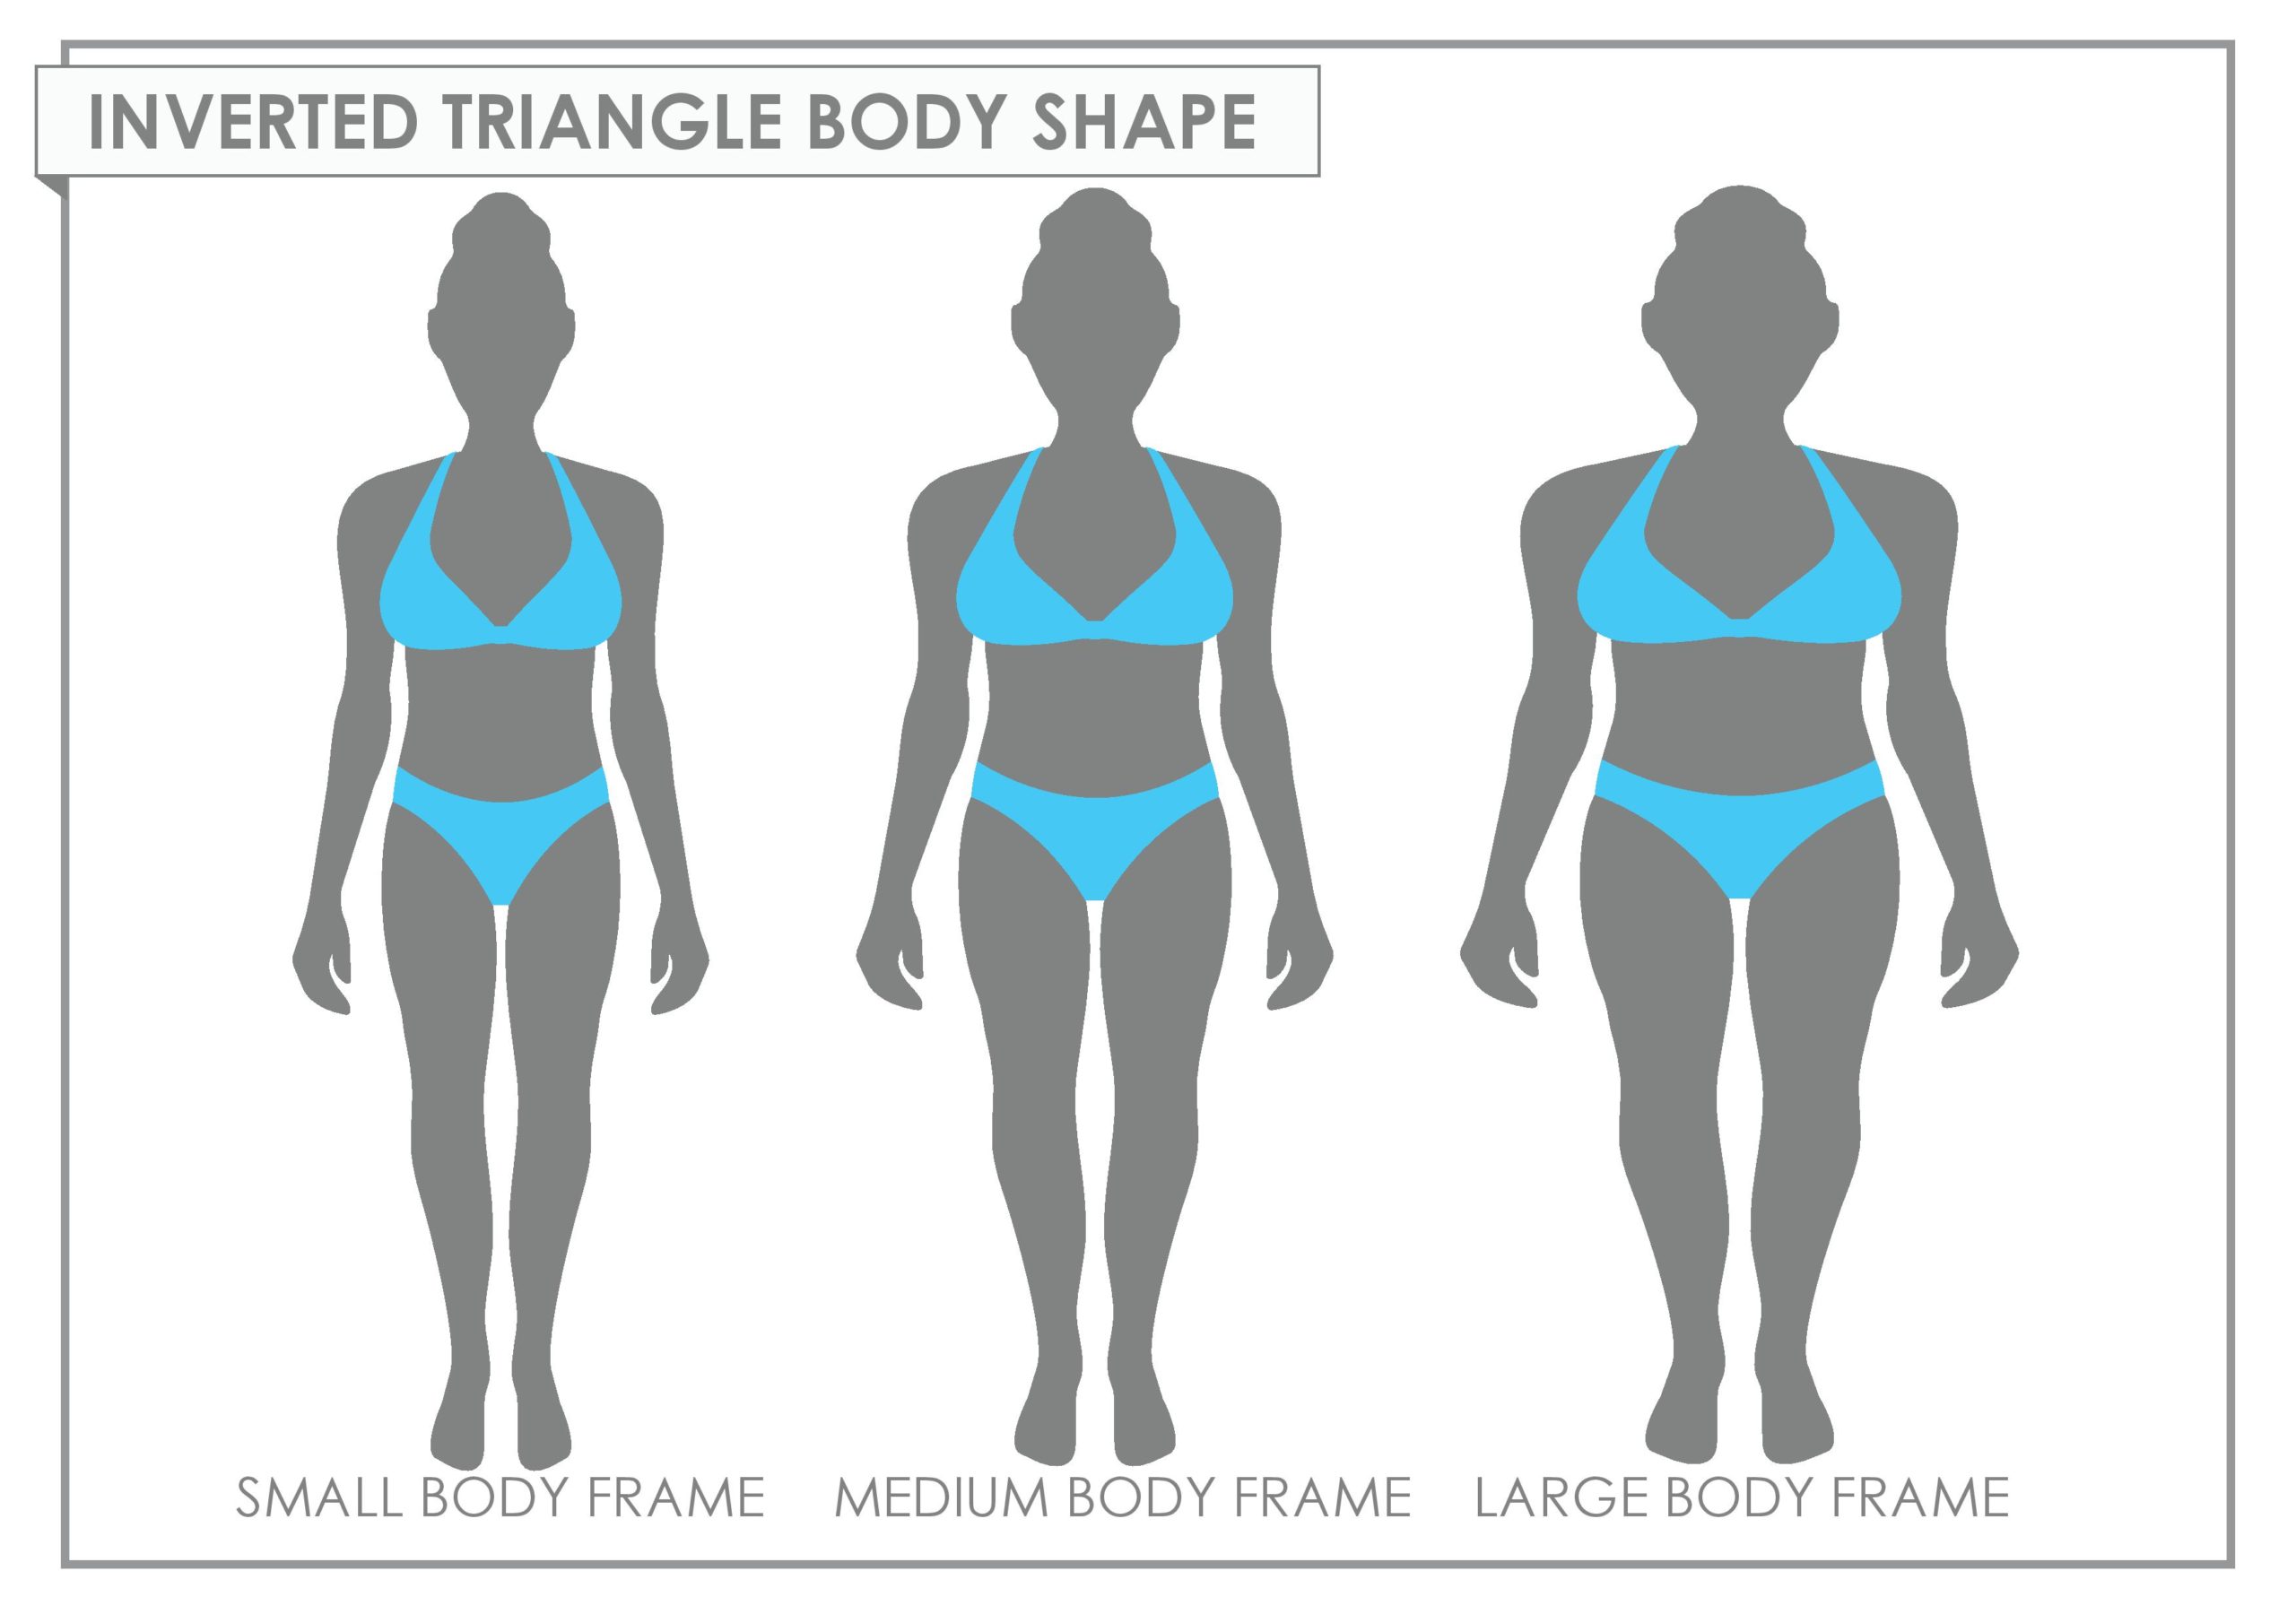 How to dress inverted triangle with a small bust - Fashion for